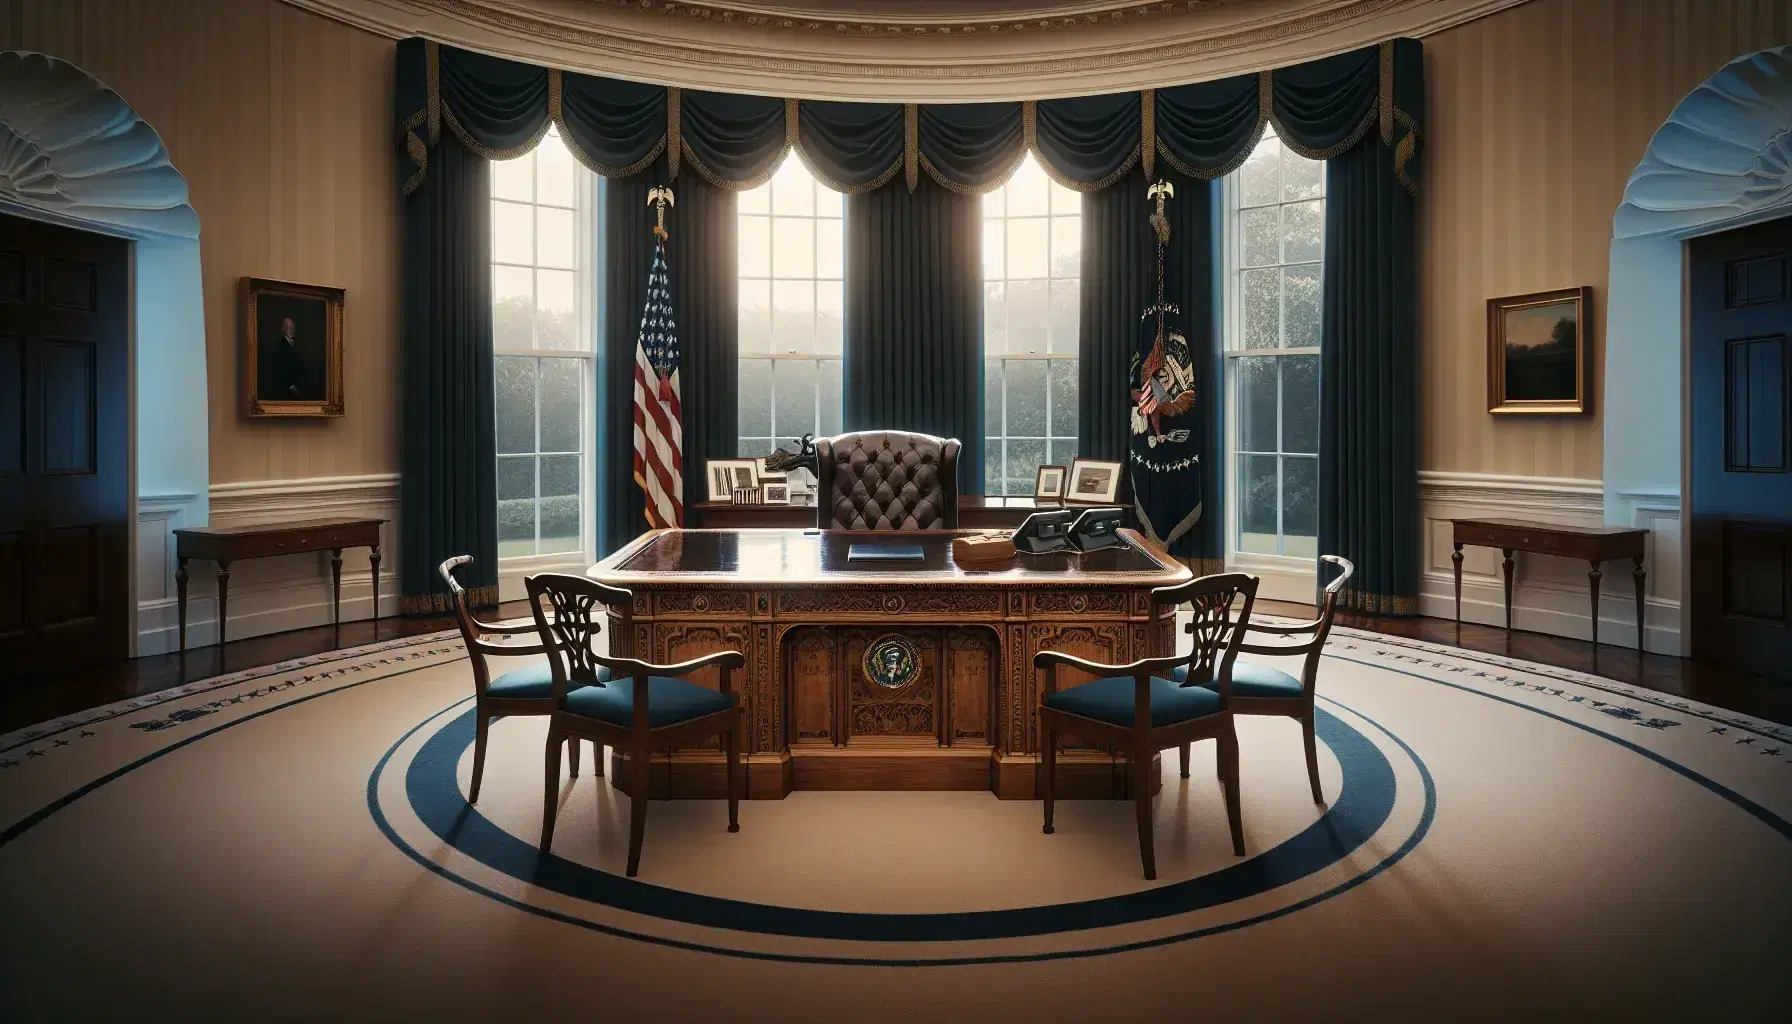 Oval Office interior with the Resolute desk, navy blue curtains, American flags, landscape paintings, and a traditional phone set.